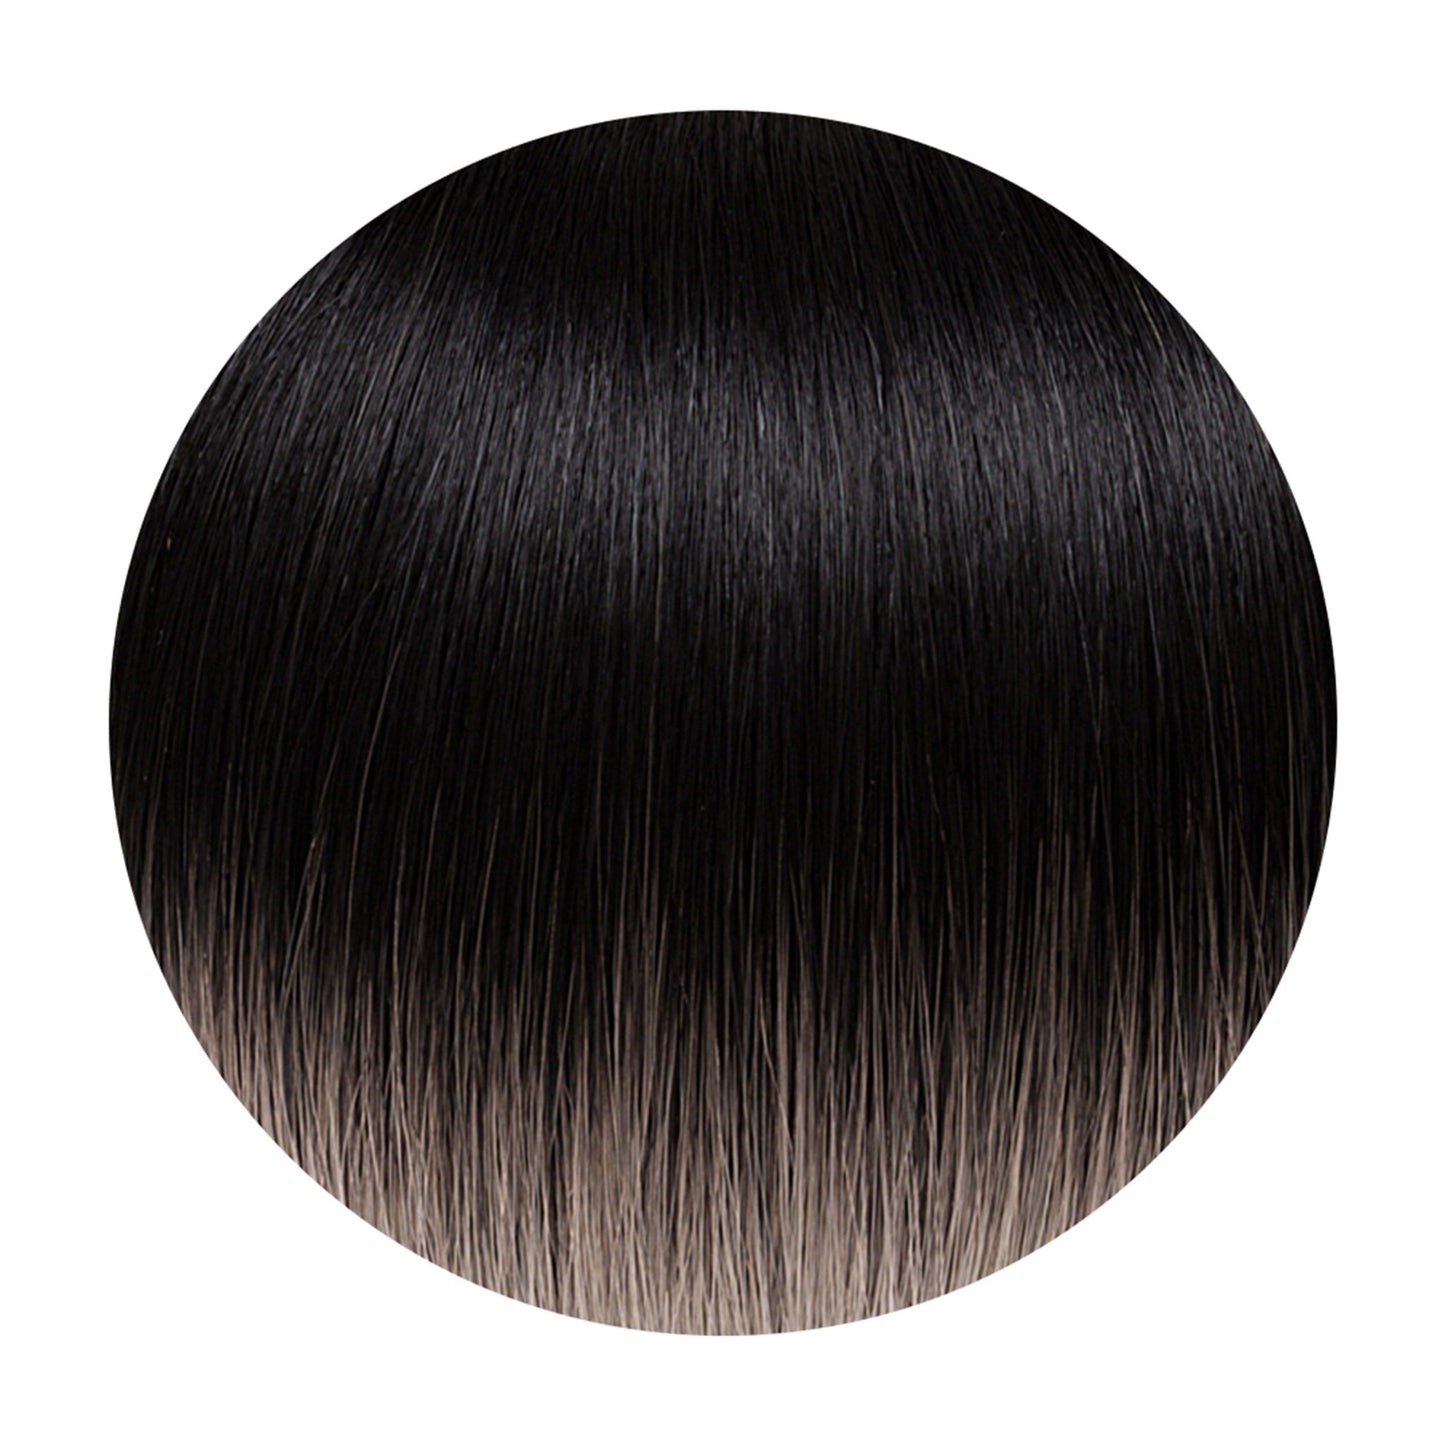 Seamless1 Salt n Pepper Balayage Colour Human Hair in 5 Piece - shelley and co